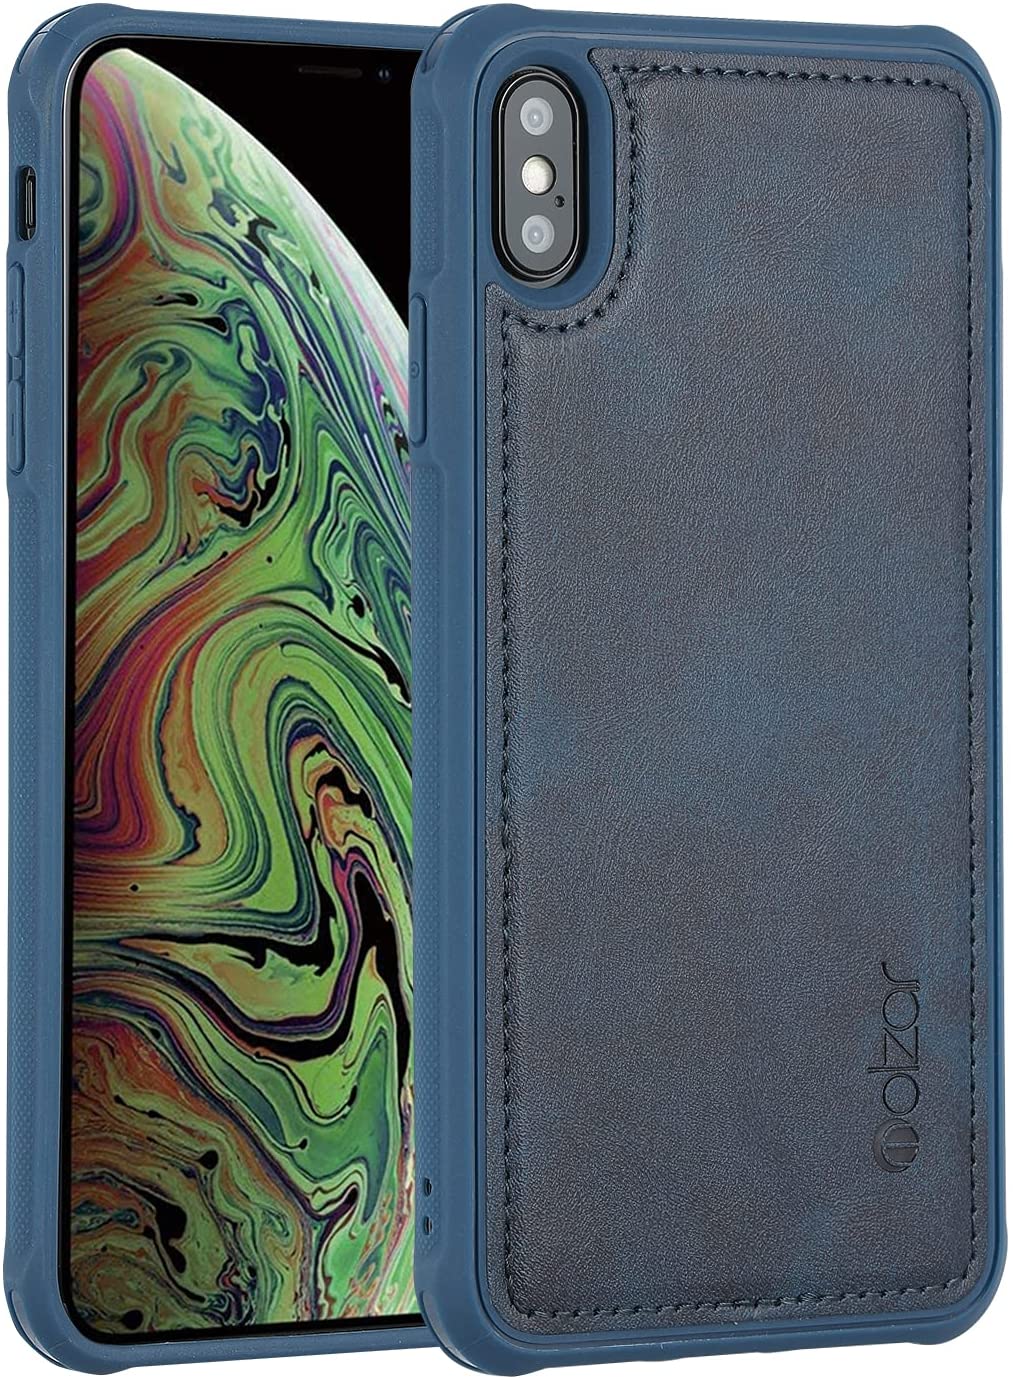 Molzar MAG Series iPhone Xs Max Case - Molzar-iphone cases and accessories